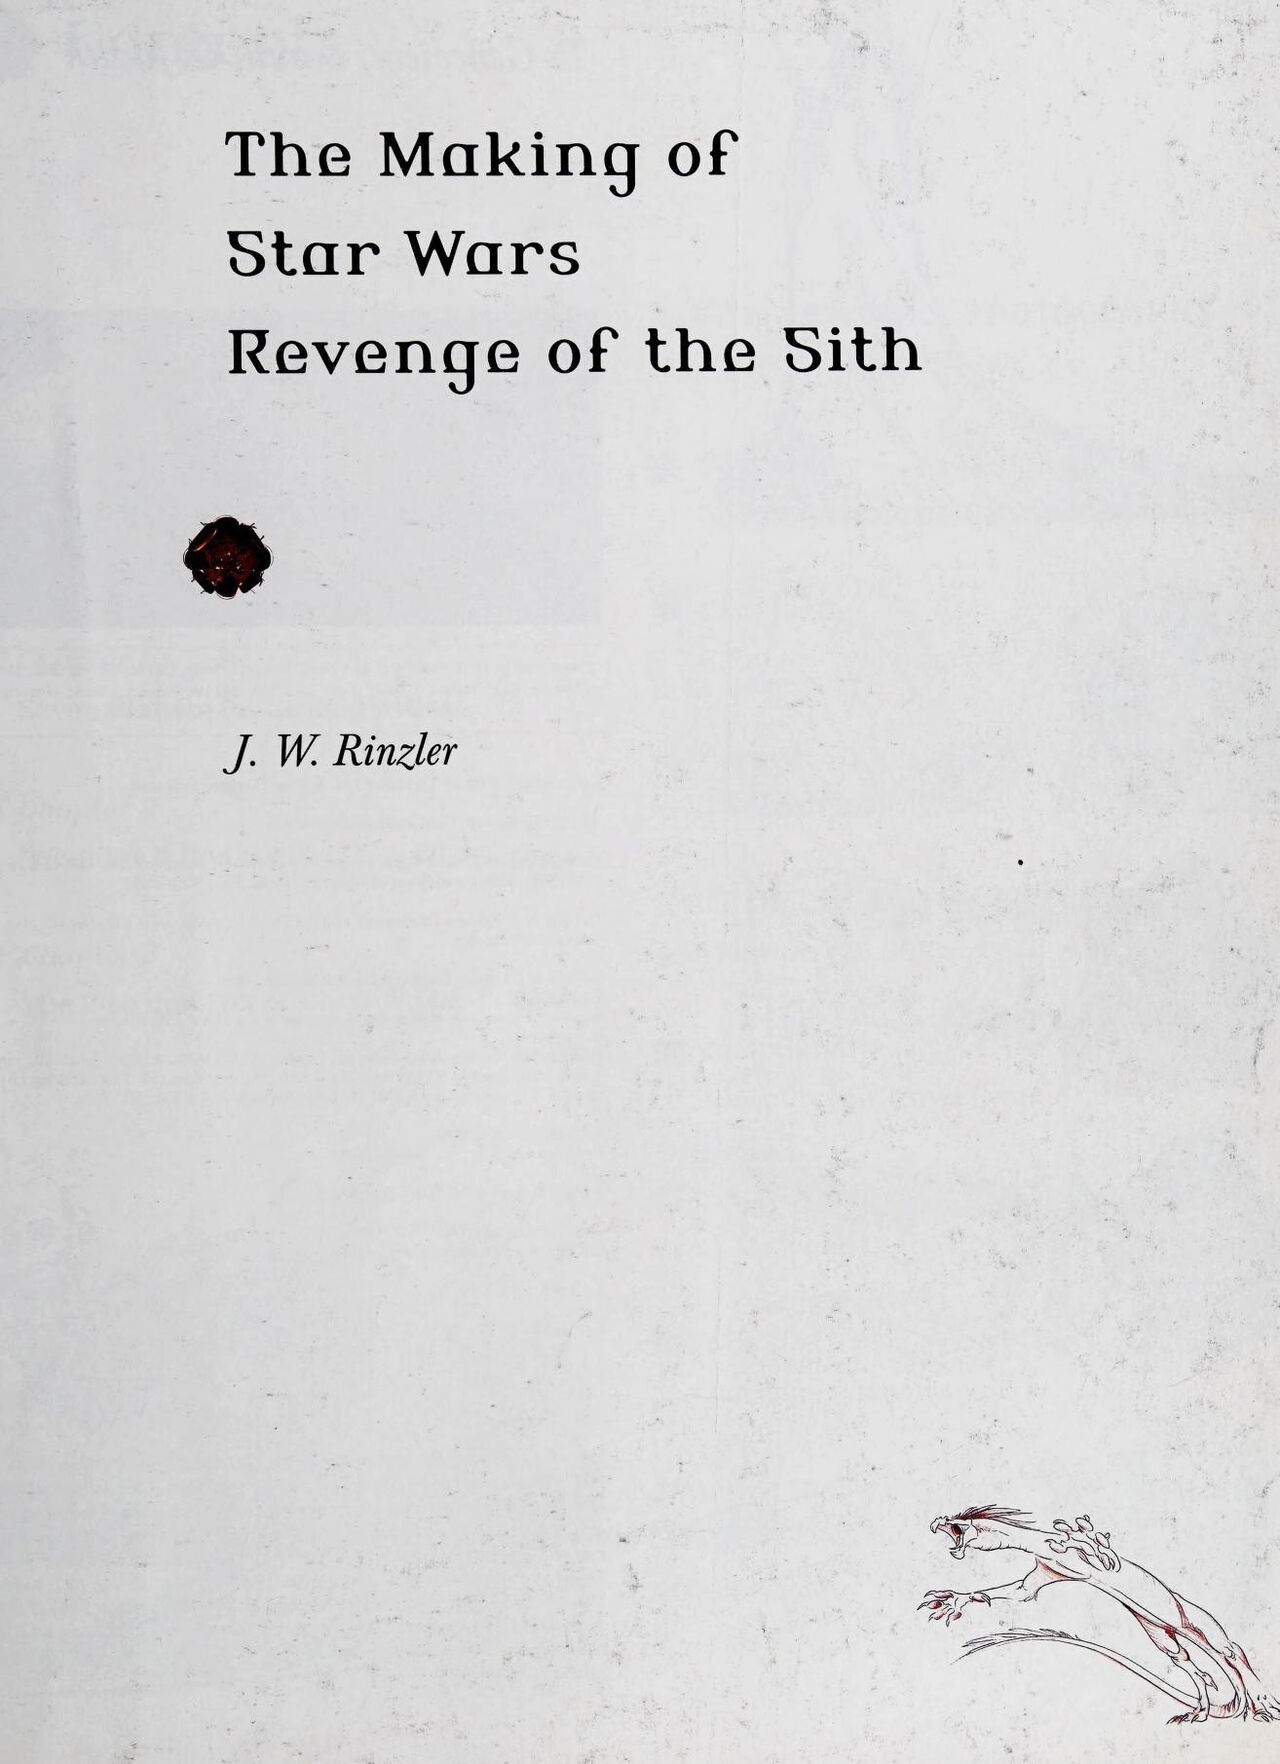 The Making of Star Wars: Revenge of the Sith 4